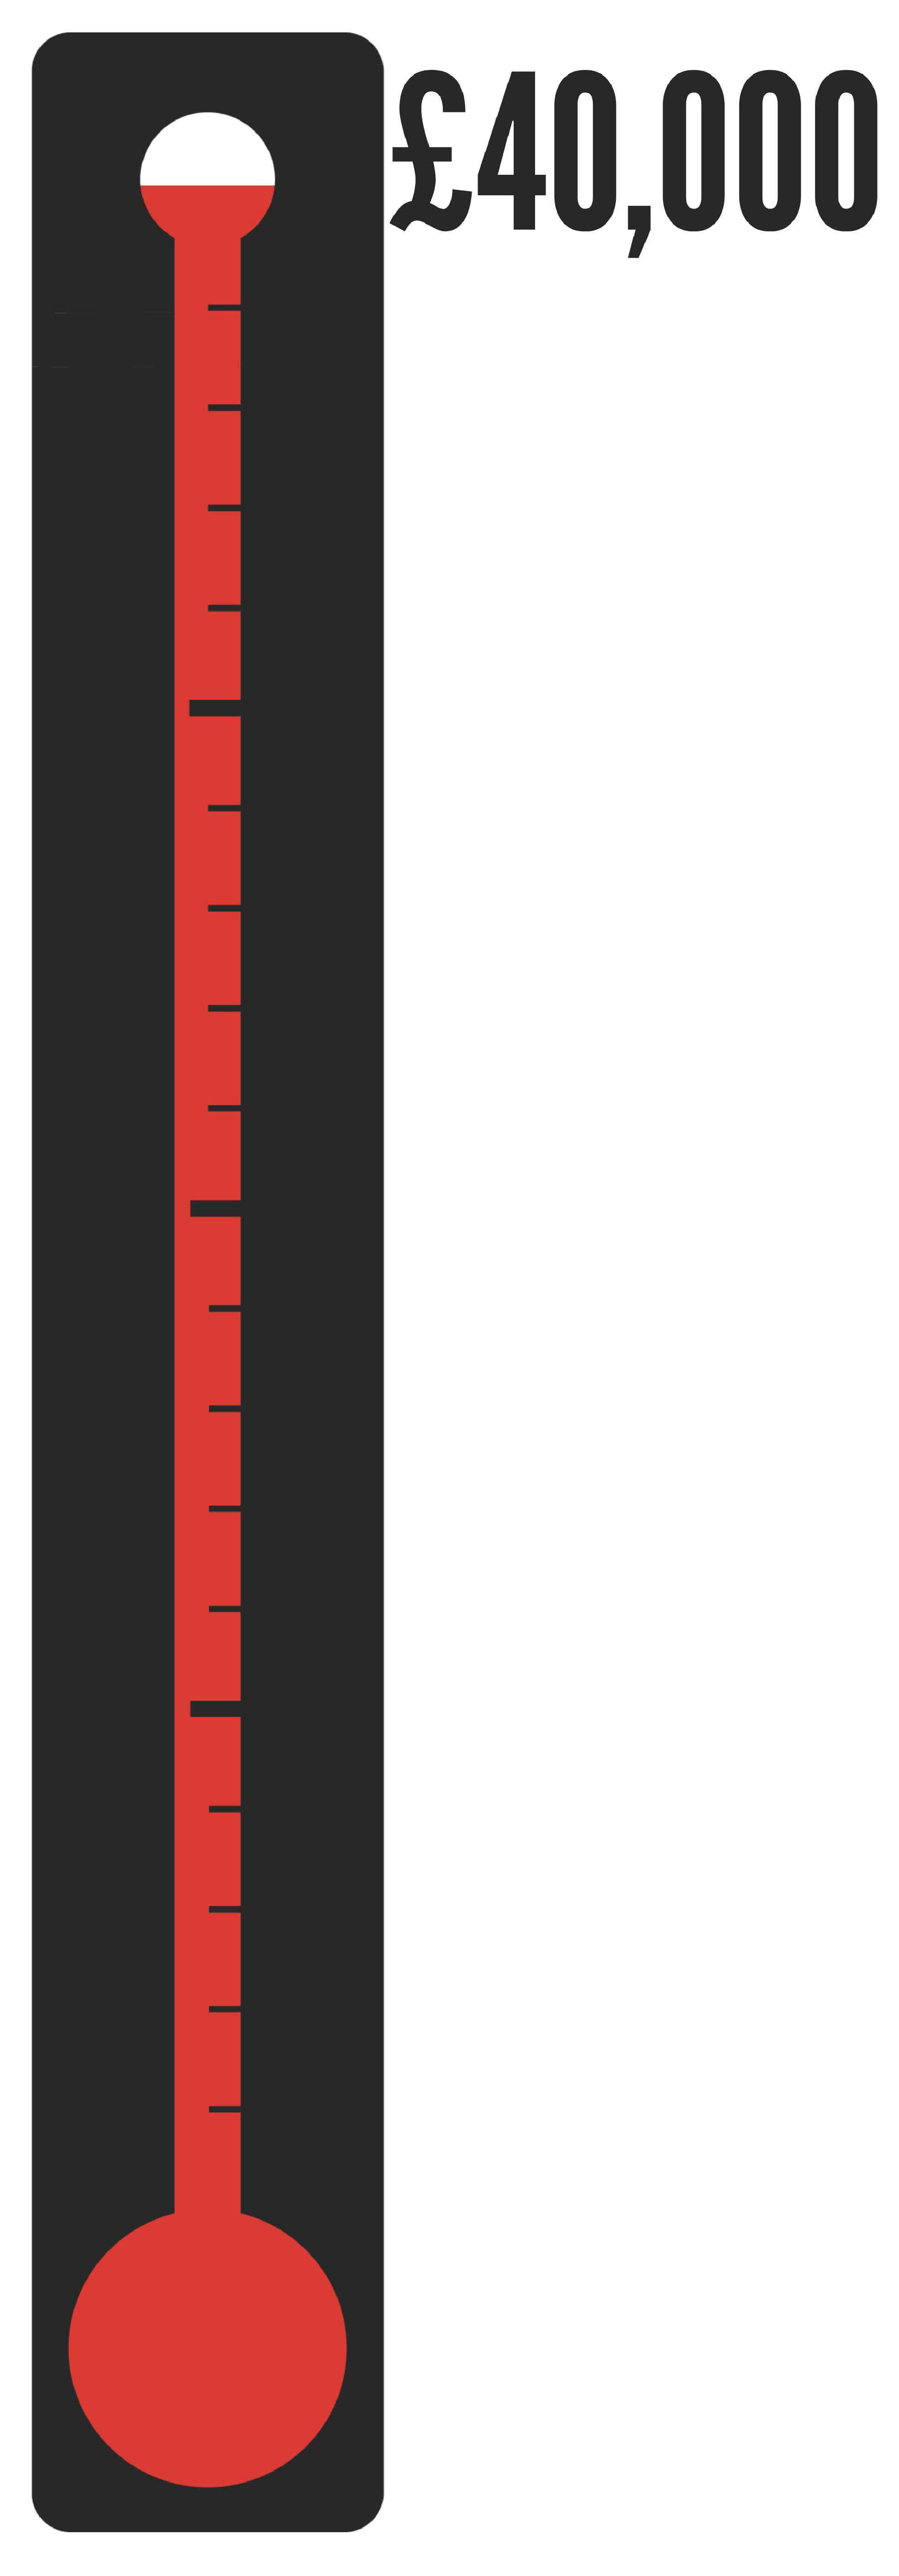 Movember thermometer